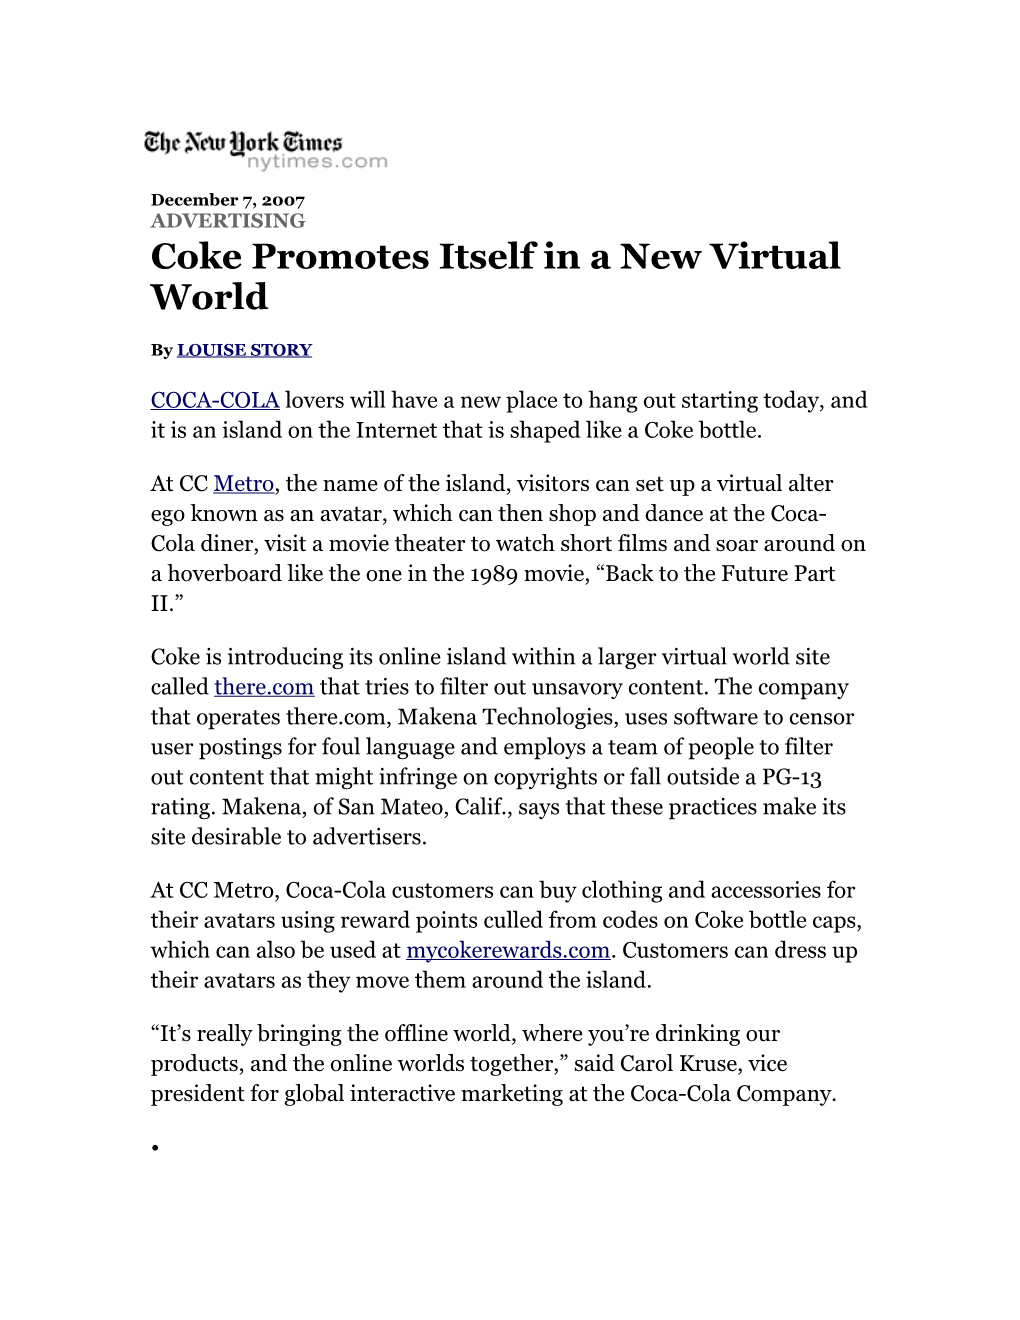 Coke Promotes Itself in a New Virtual World